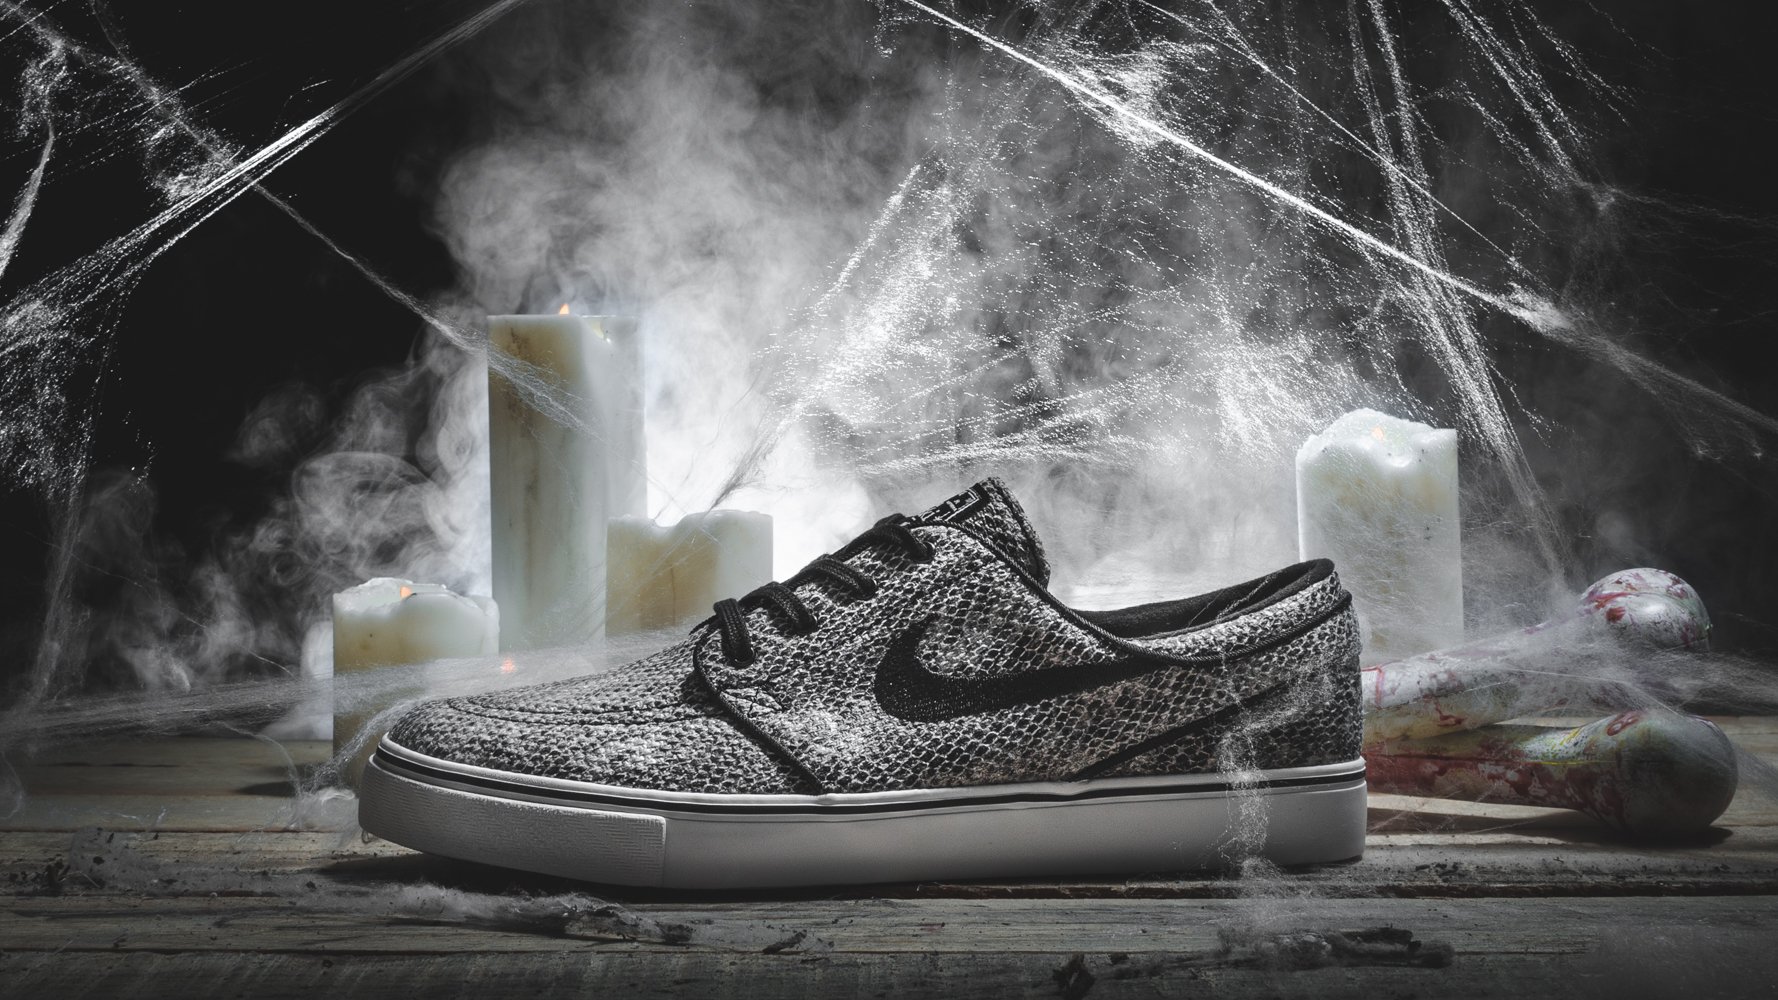 sivasdescalzo on Twitter: "The Nike SB Zoom Janoski Premium "Cobra" joins the #SVDHalloween with a snake-effect upper! 🐍🕸 ➡️ https://t.co/zxGyKf2voZ https://t.co/iwDvSQAb8O" Twitter